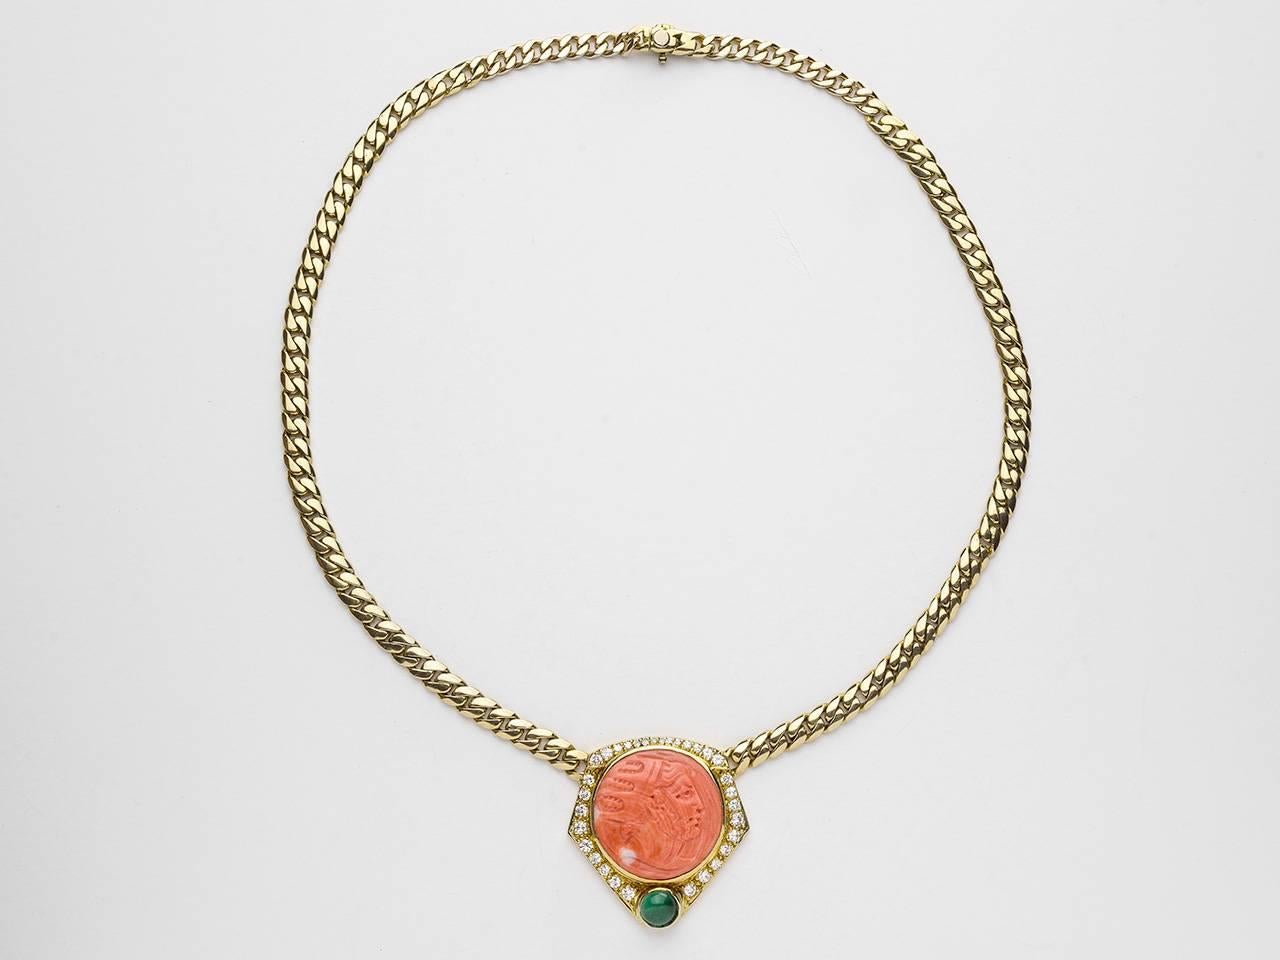 14kt. Gold snake chain, centering a diamond bezel set carved coral element with emerald accent.n Diamond weight approximately 1.25 carats.